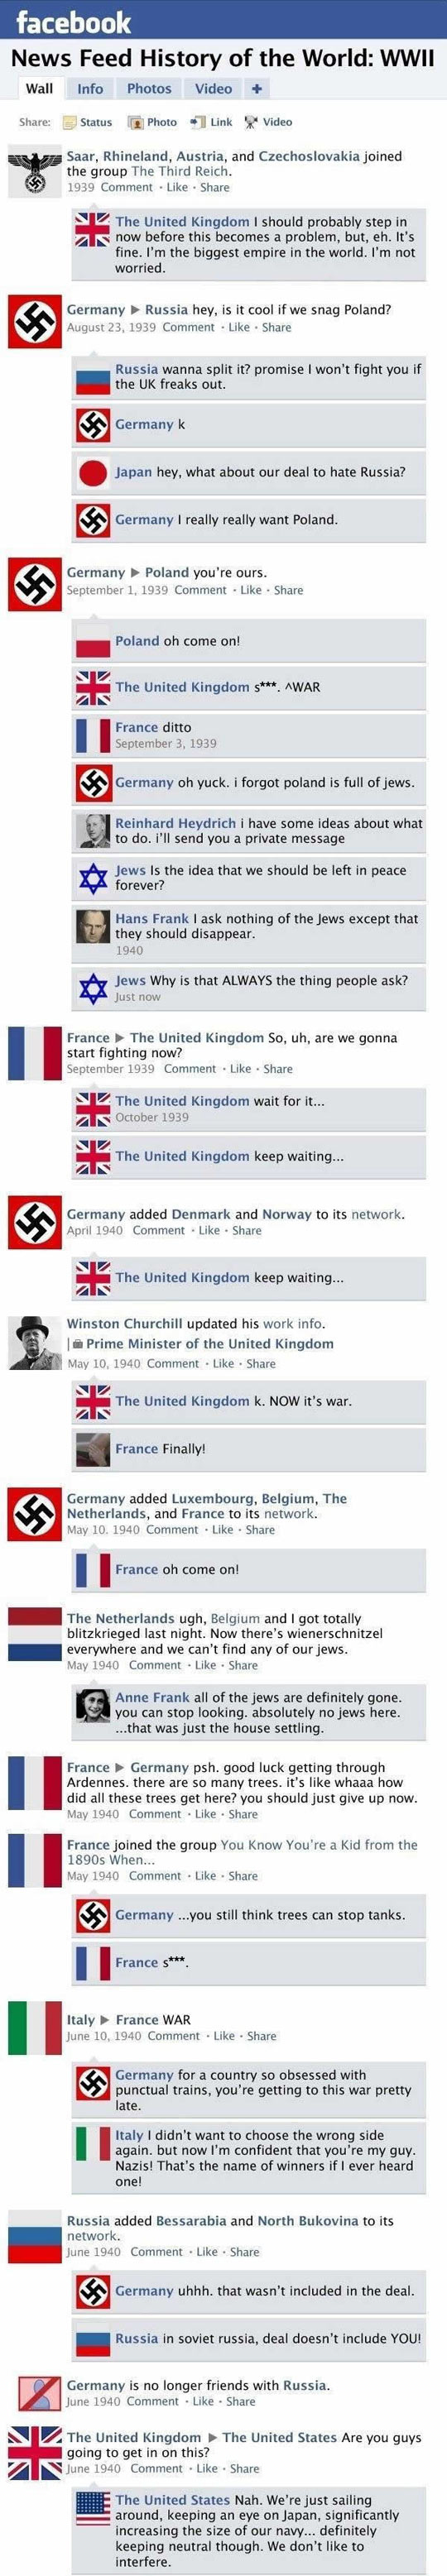 If Facebook Existed During WWII